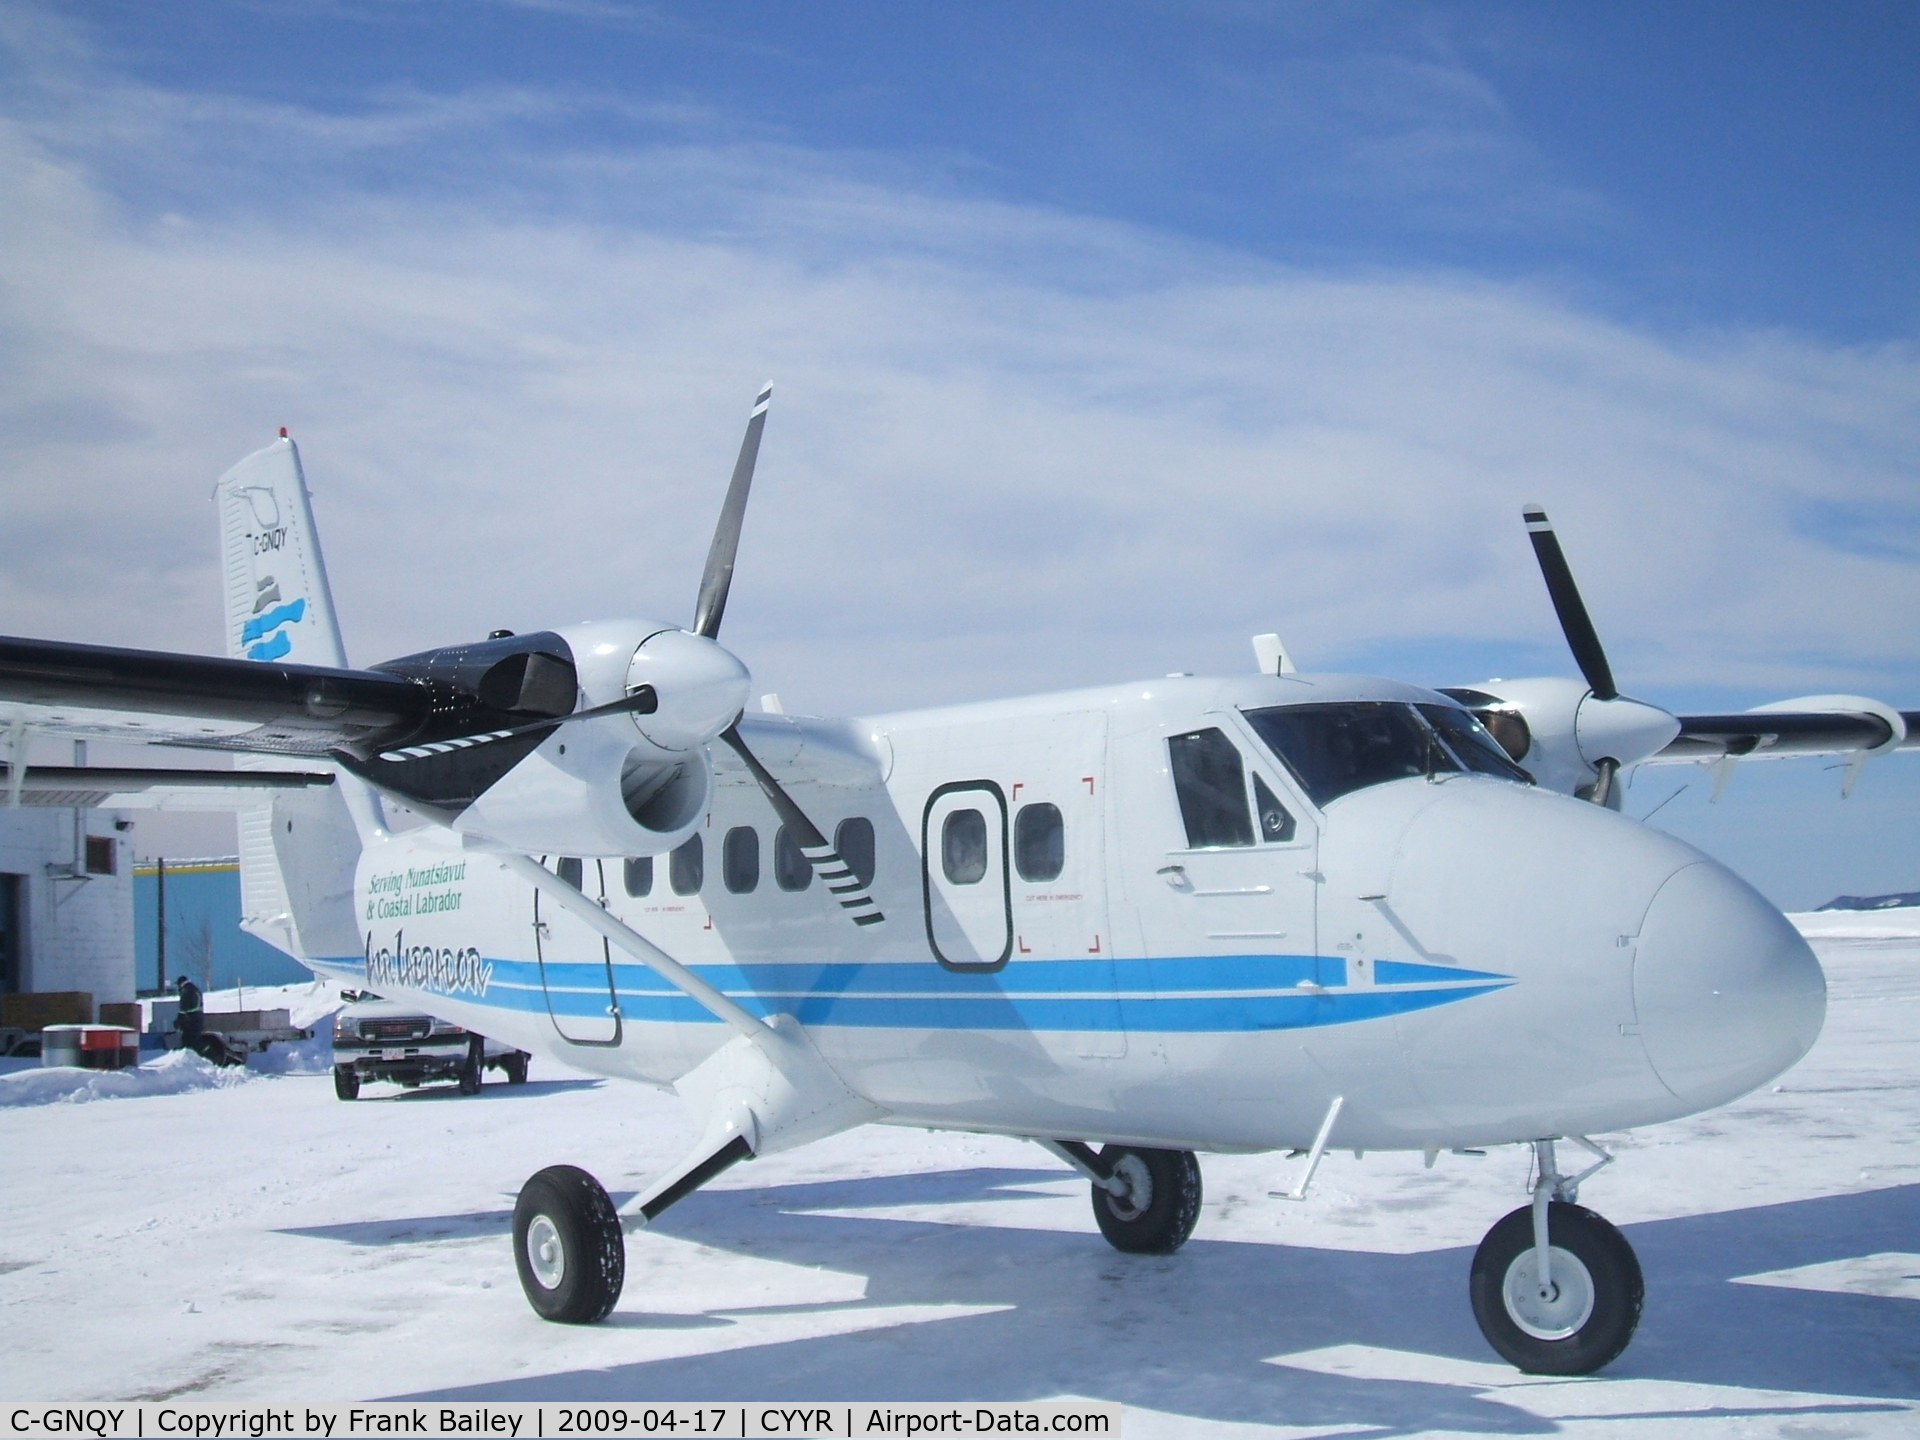 C-GNQY, 1975 De Havilland Canada DHC-6-300 Twin Otter C/N 450, Parked at Air Labrador Terminal ( New Paint Job )